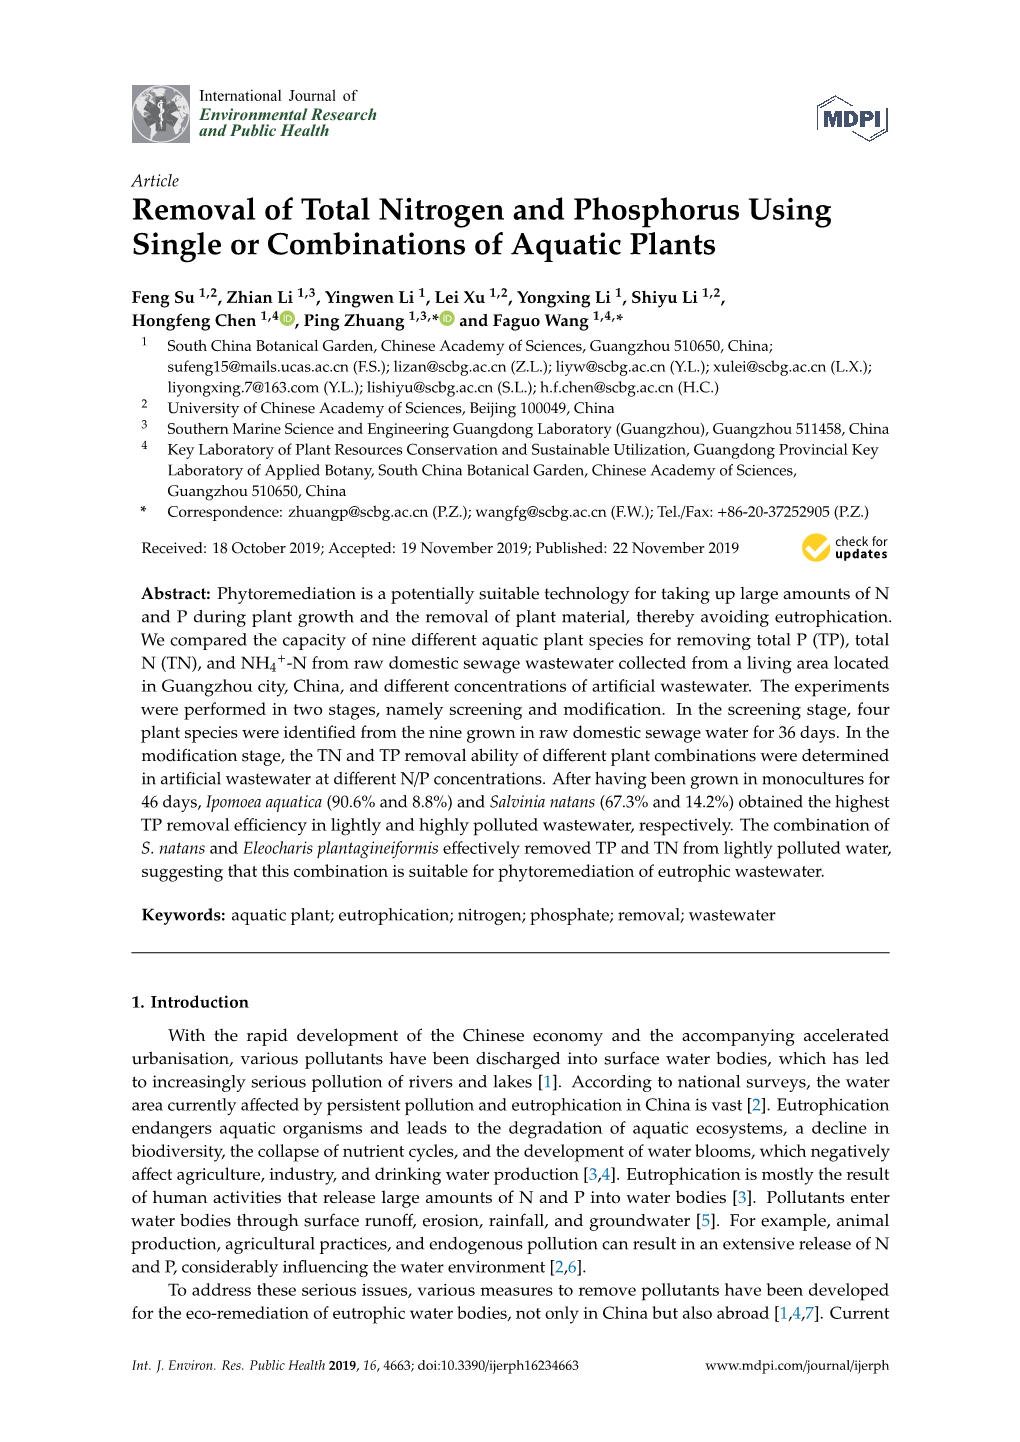 Removal of Total Nitrogen and Phosphorus Using Single Or Combinations of Aquatic Plants